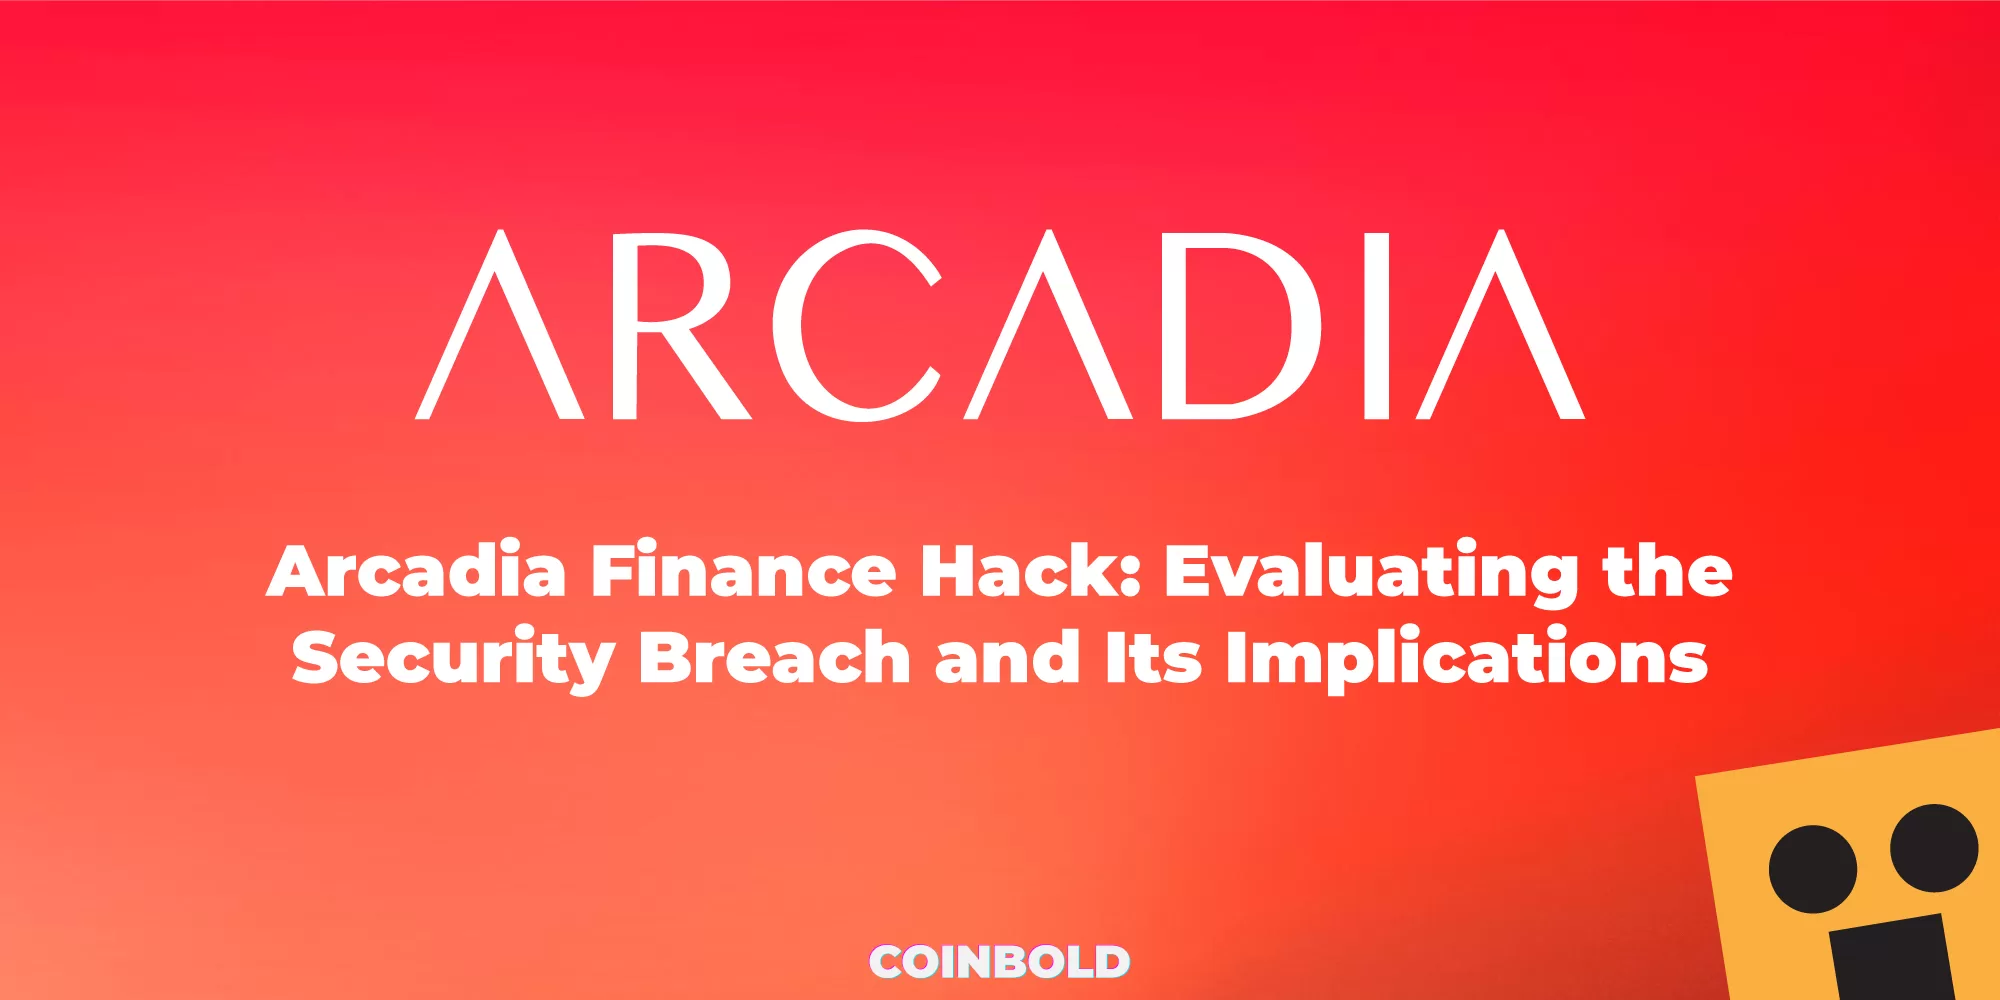 Arcadia Finance Hack: Evaluating the Security Breach and Its Implications